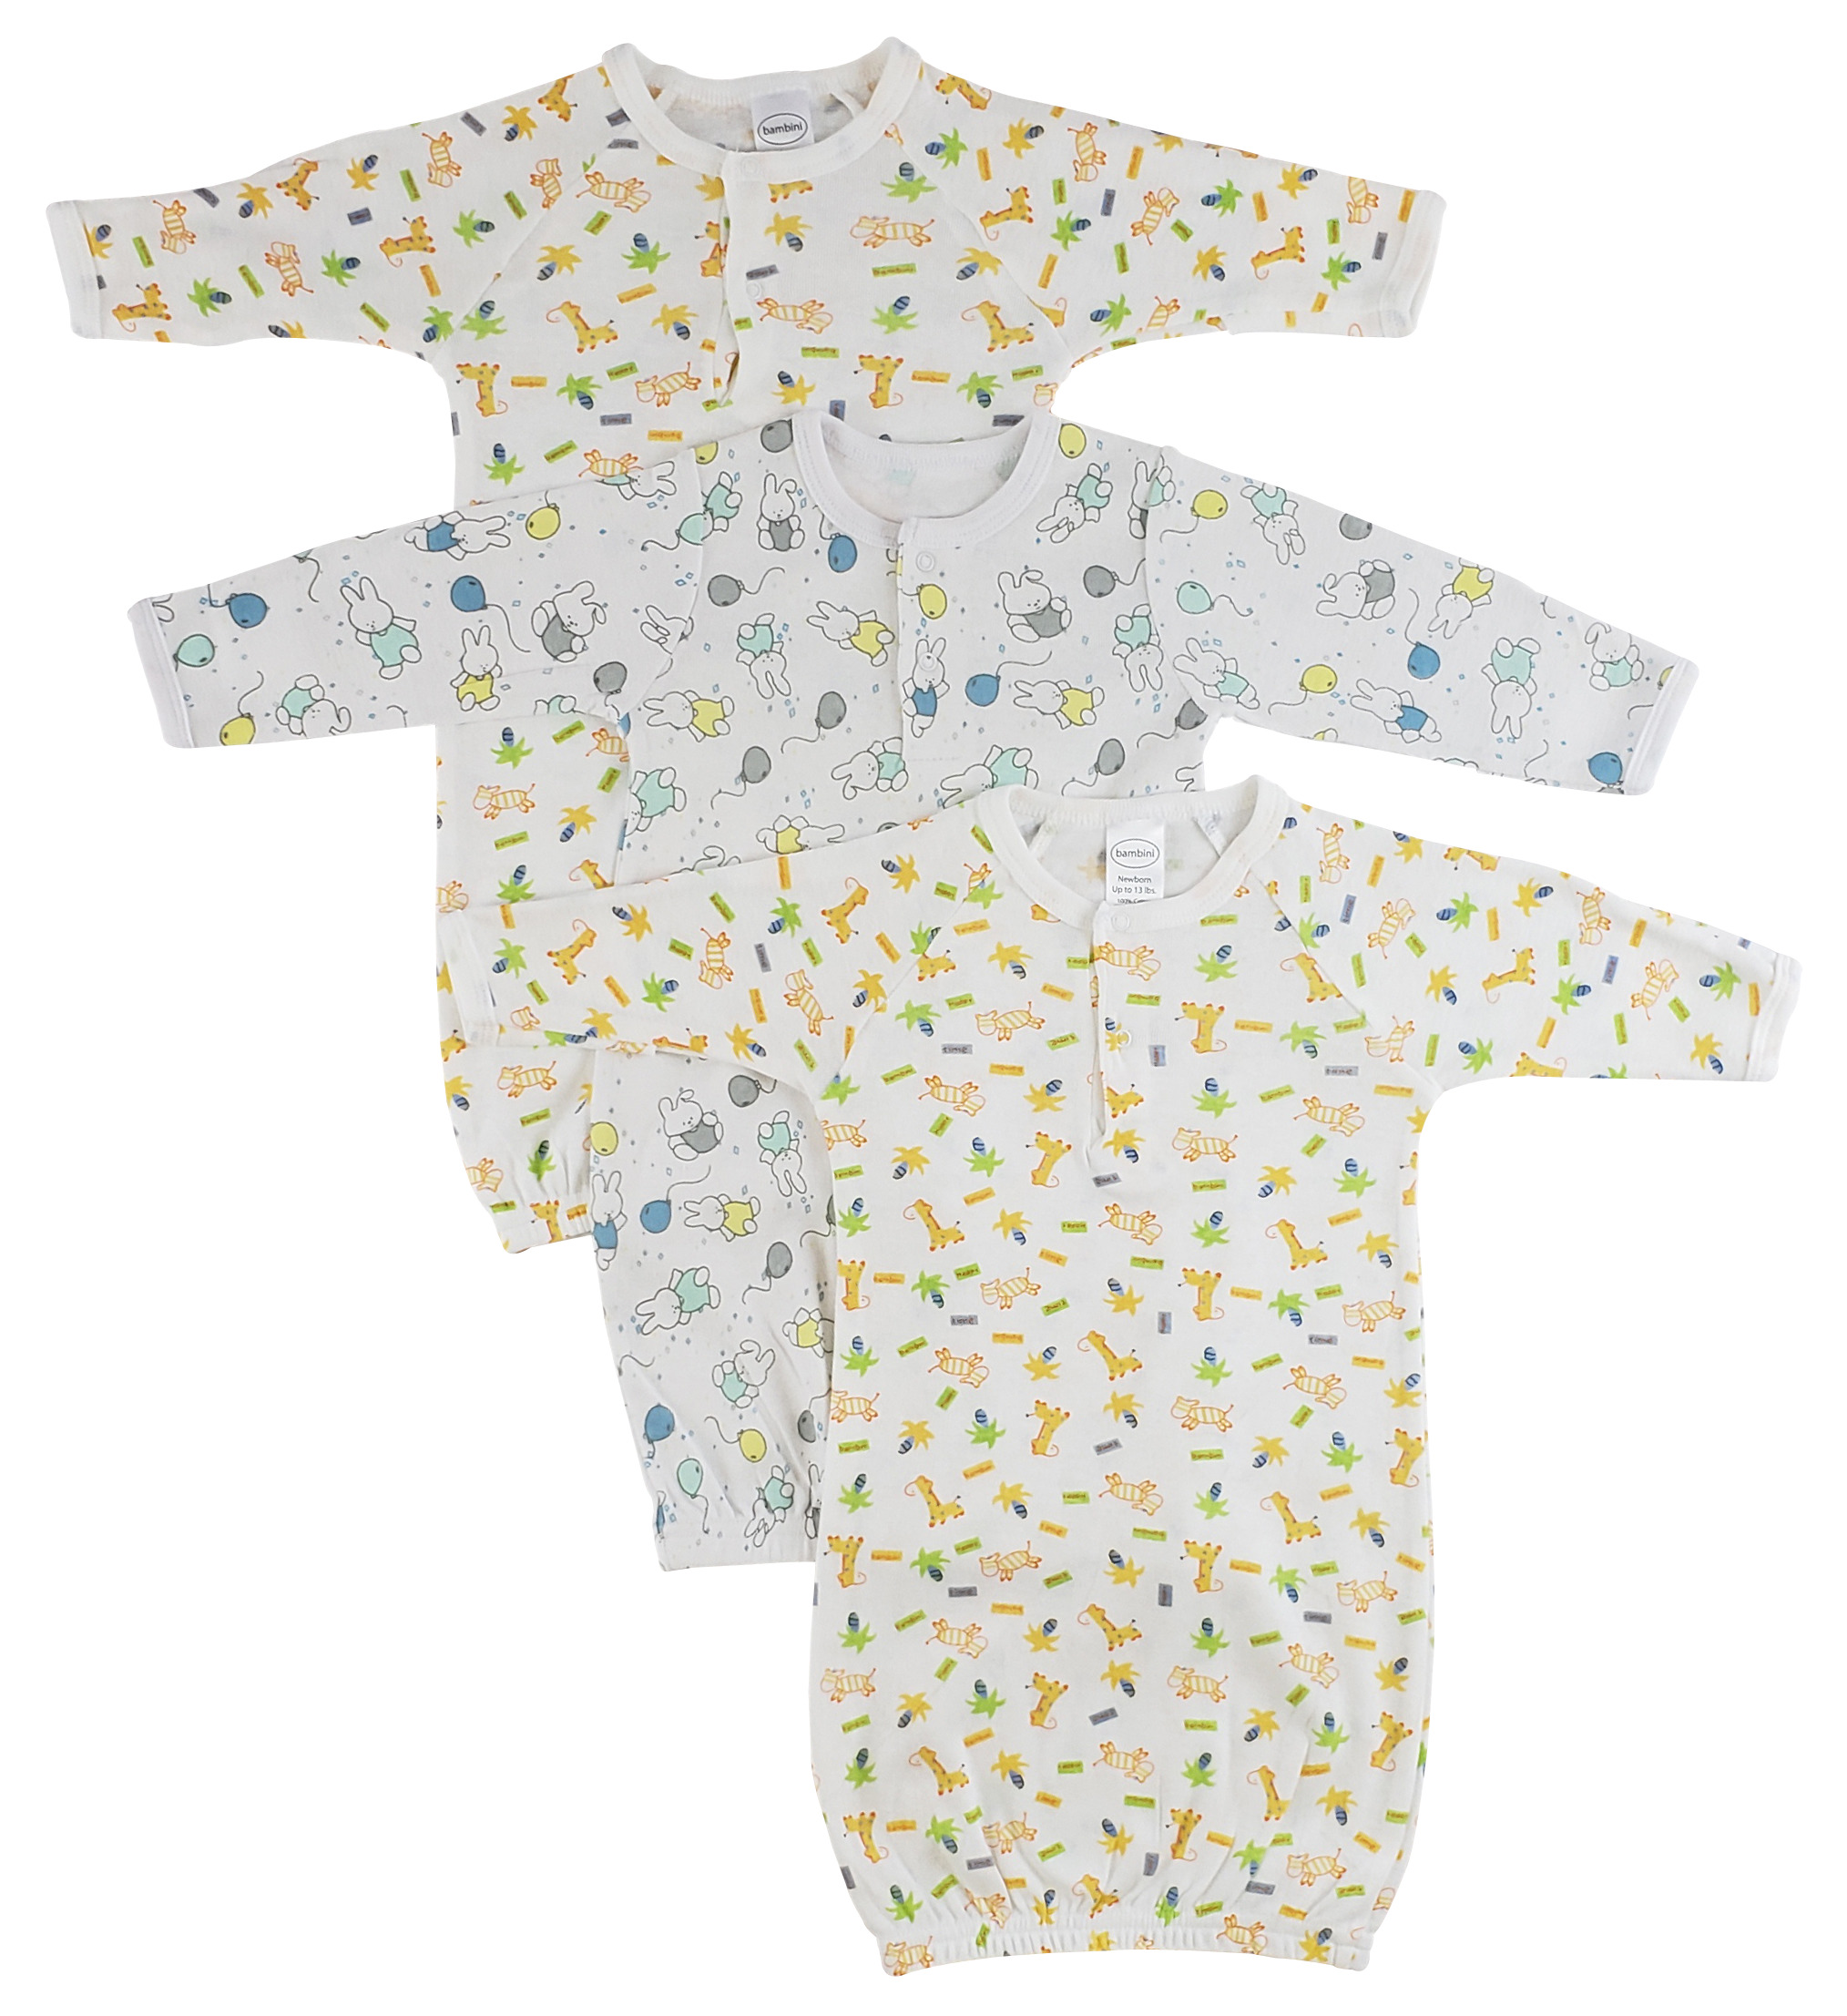 Bambini Infant Gowns - 3 Pack - Newborn